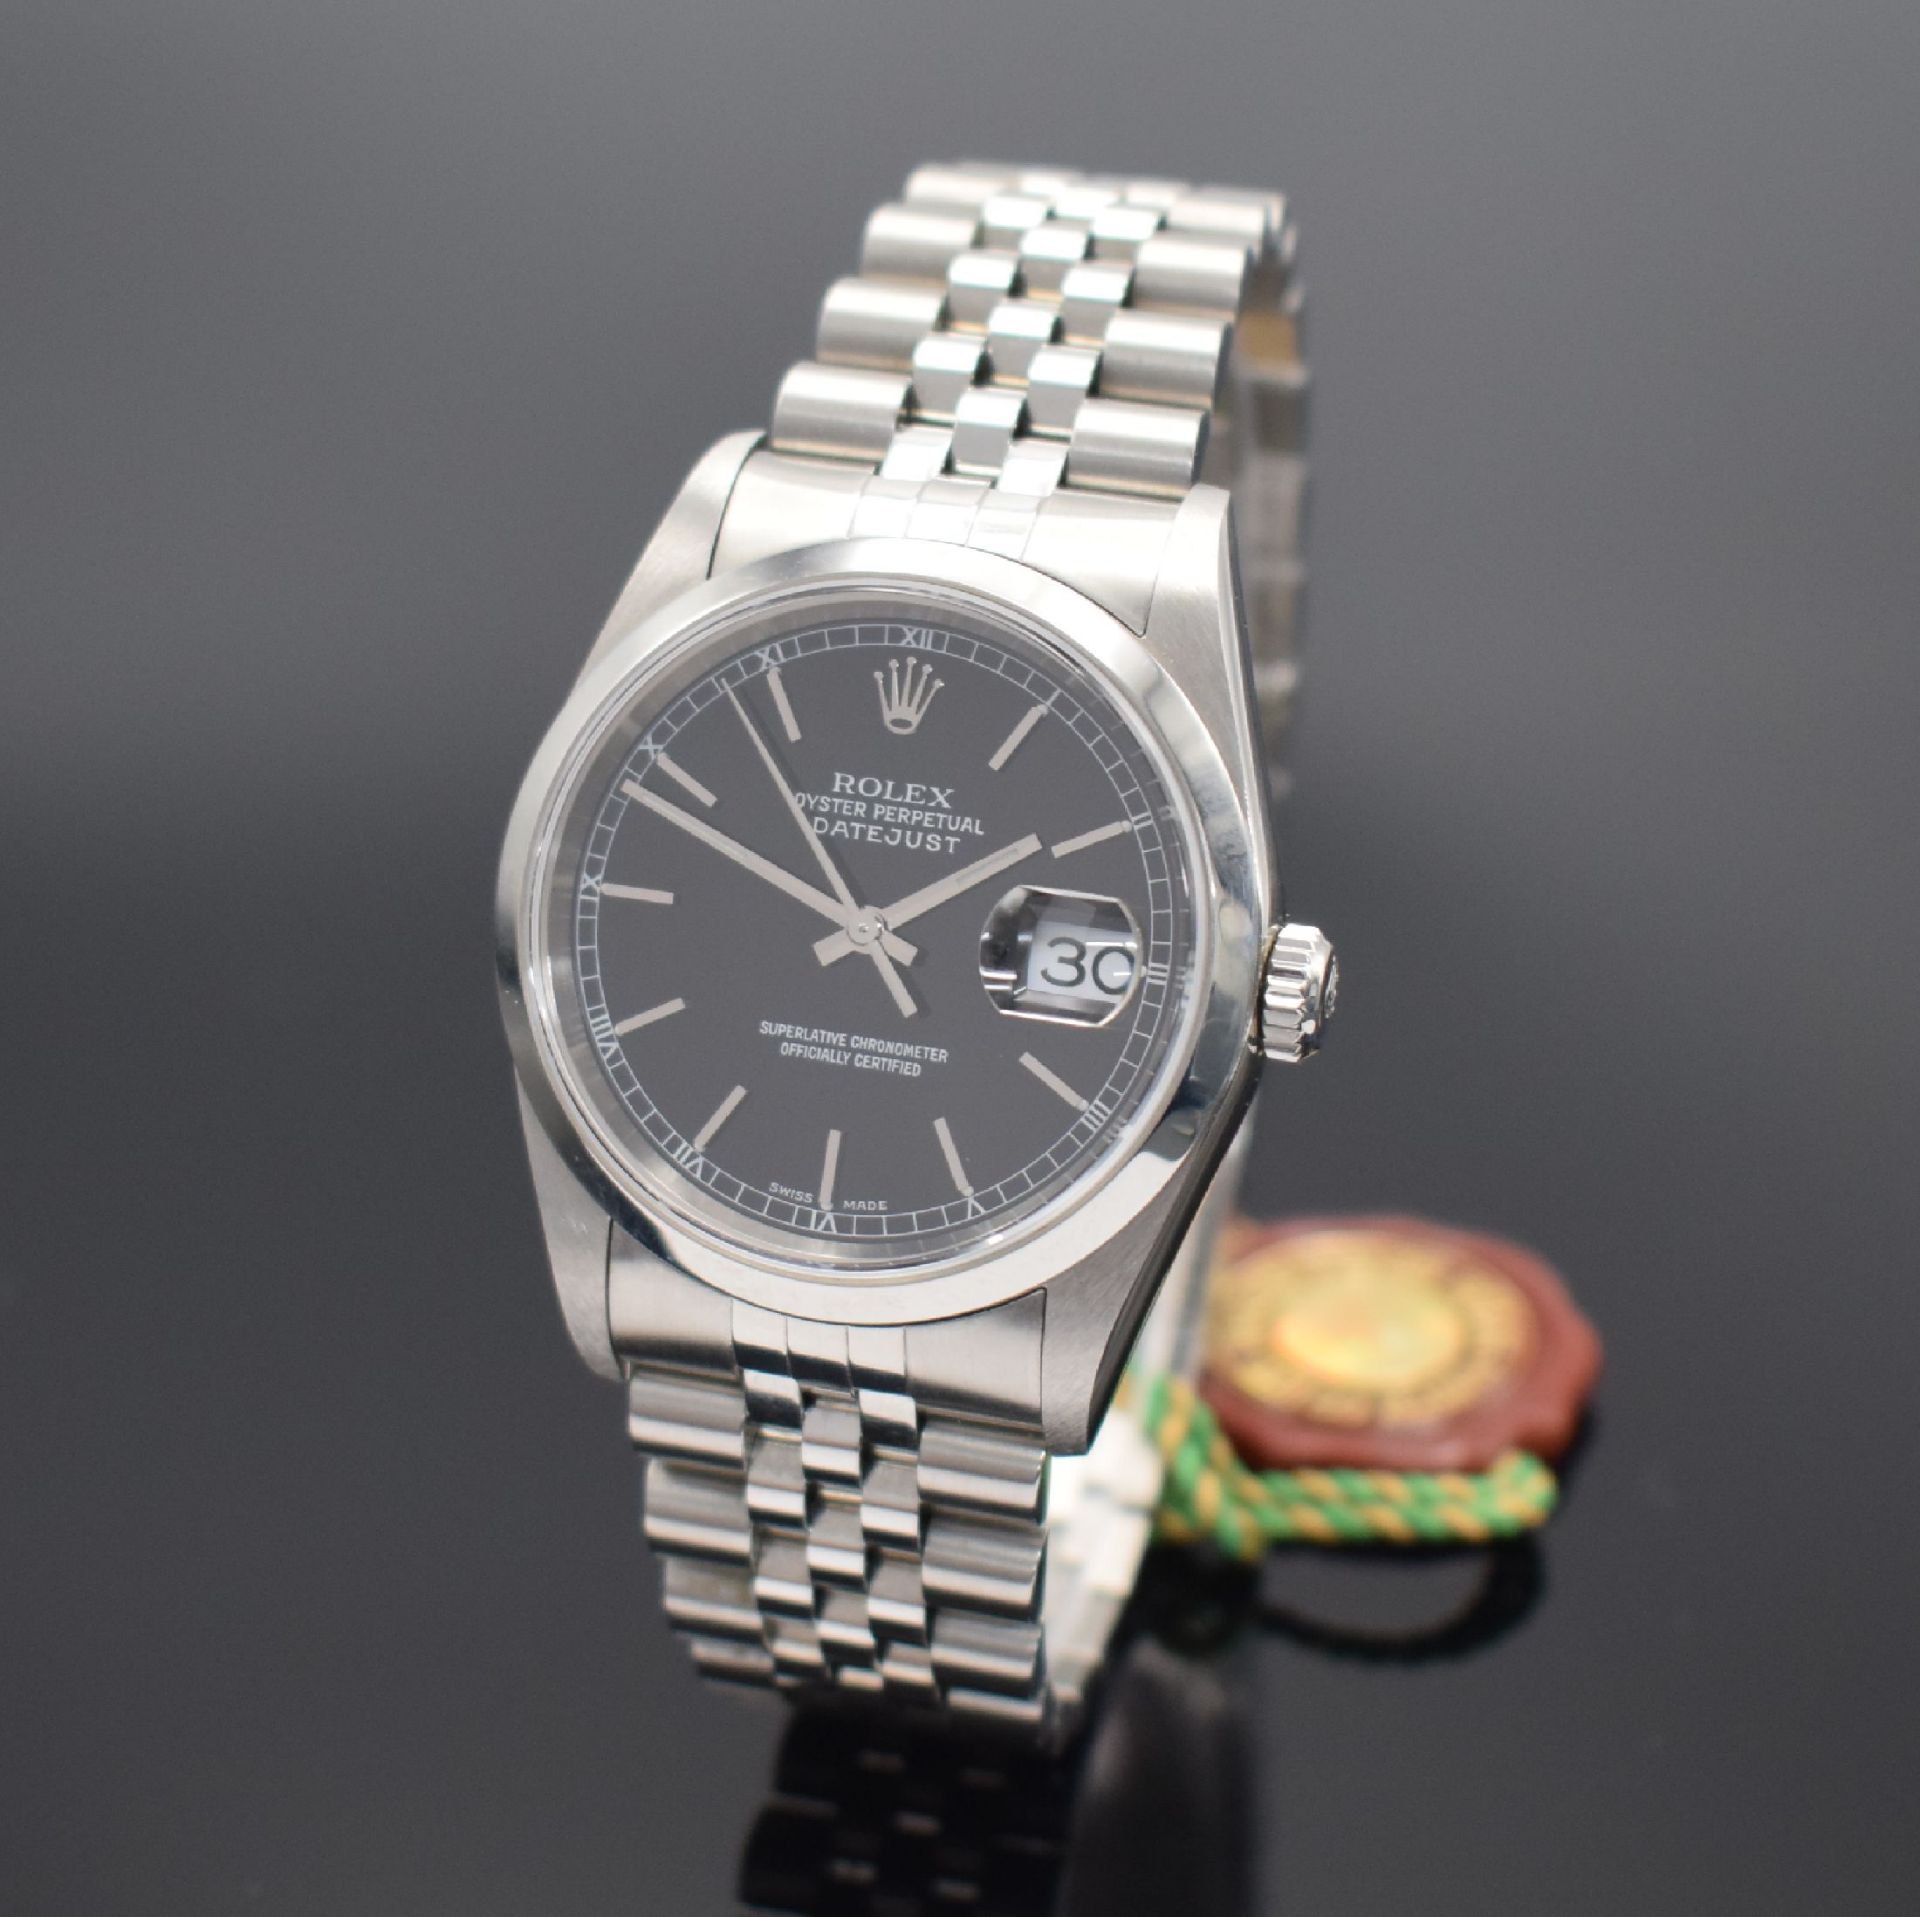 ROLEX Armbanduhr Oyster Perpetual Datejust Referenz 16200,